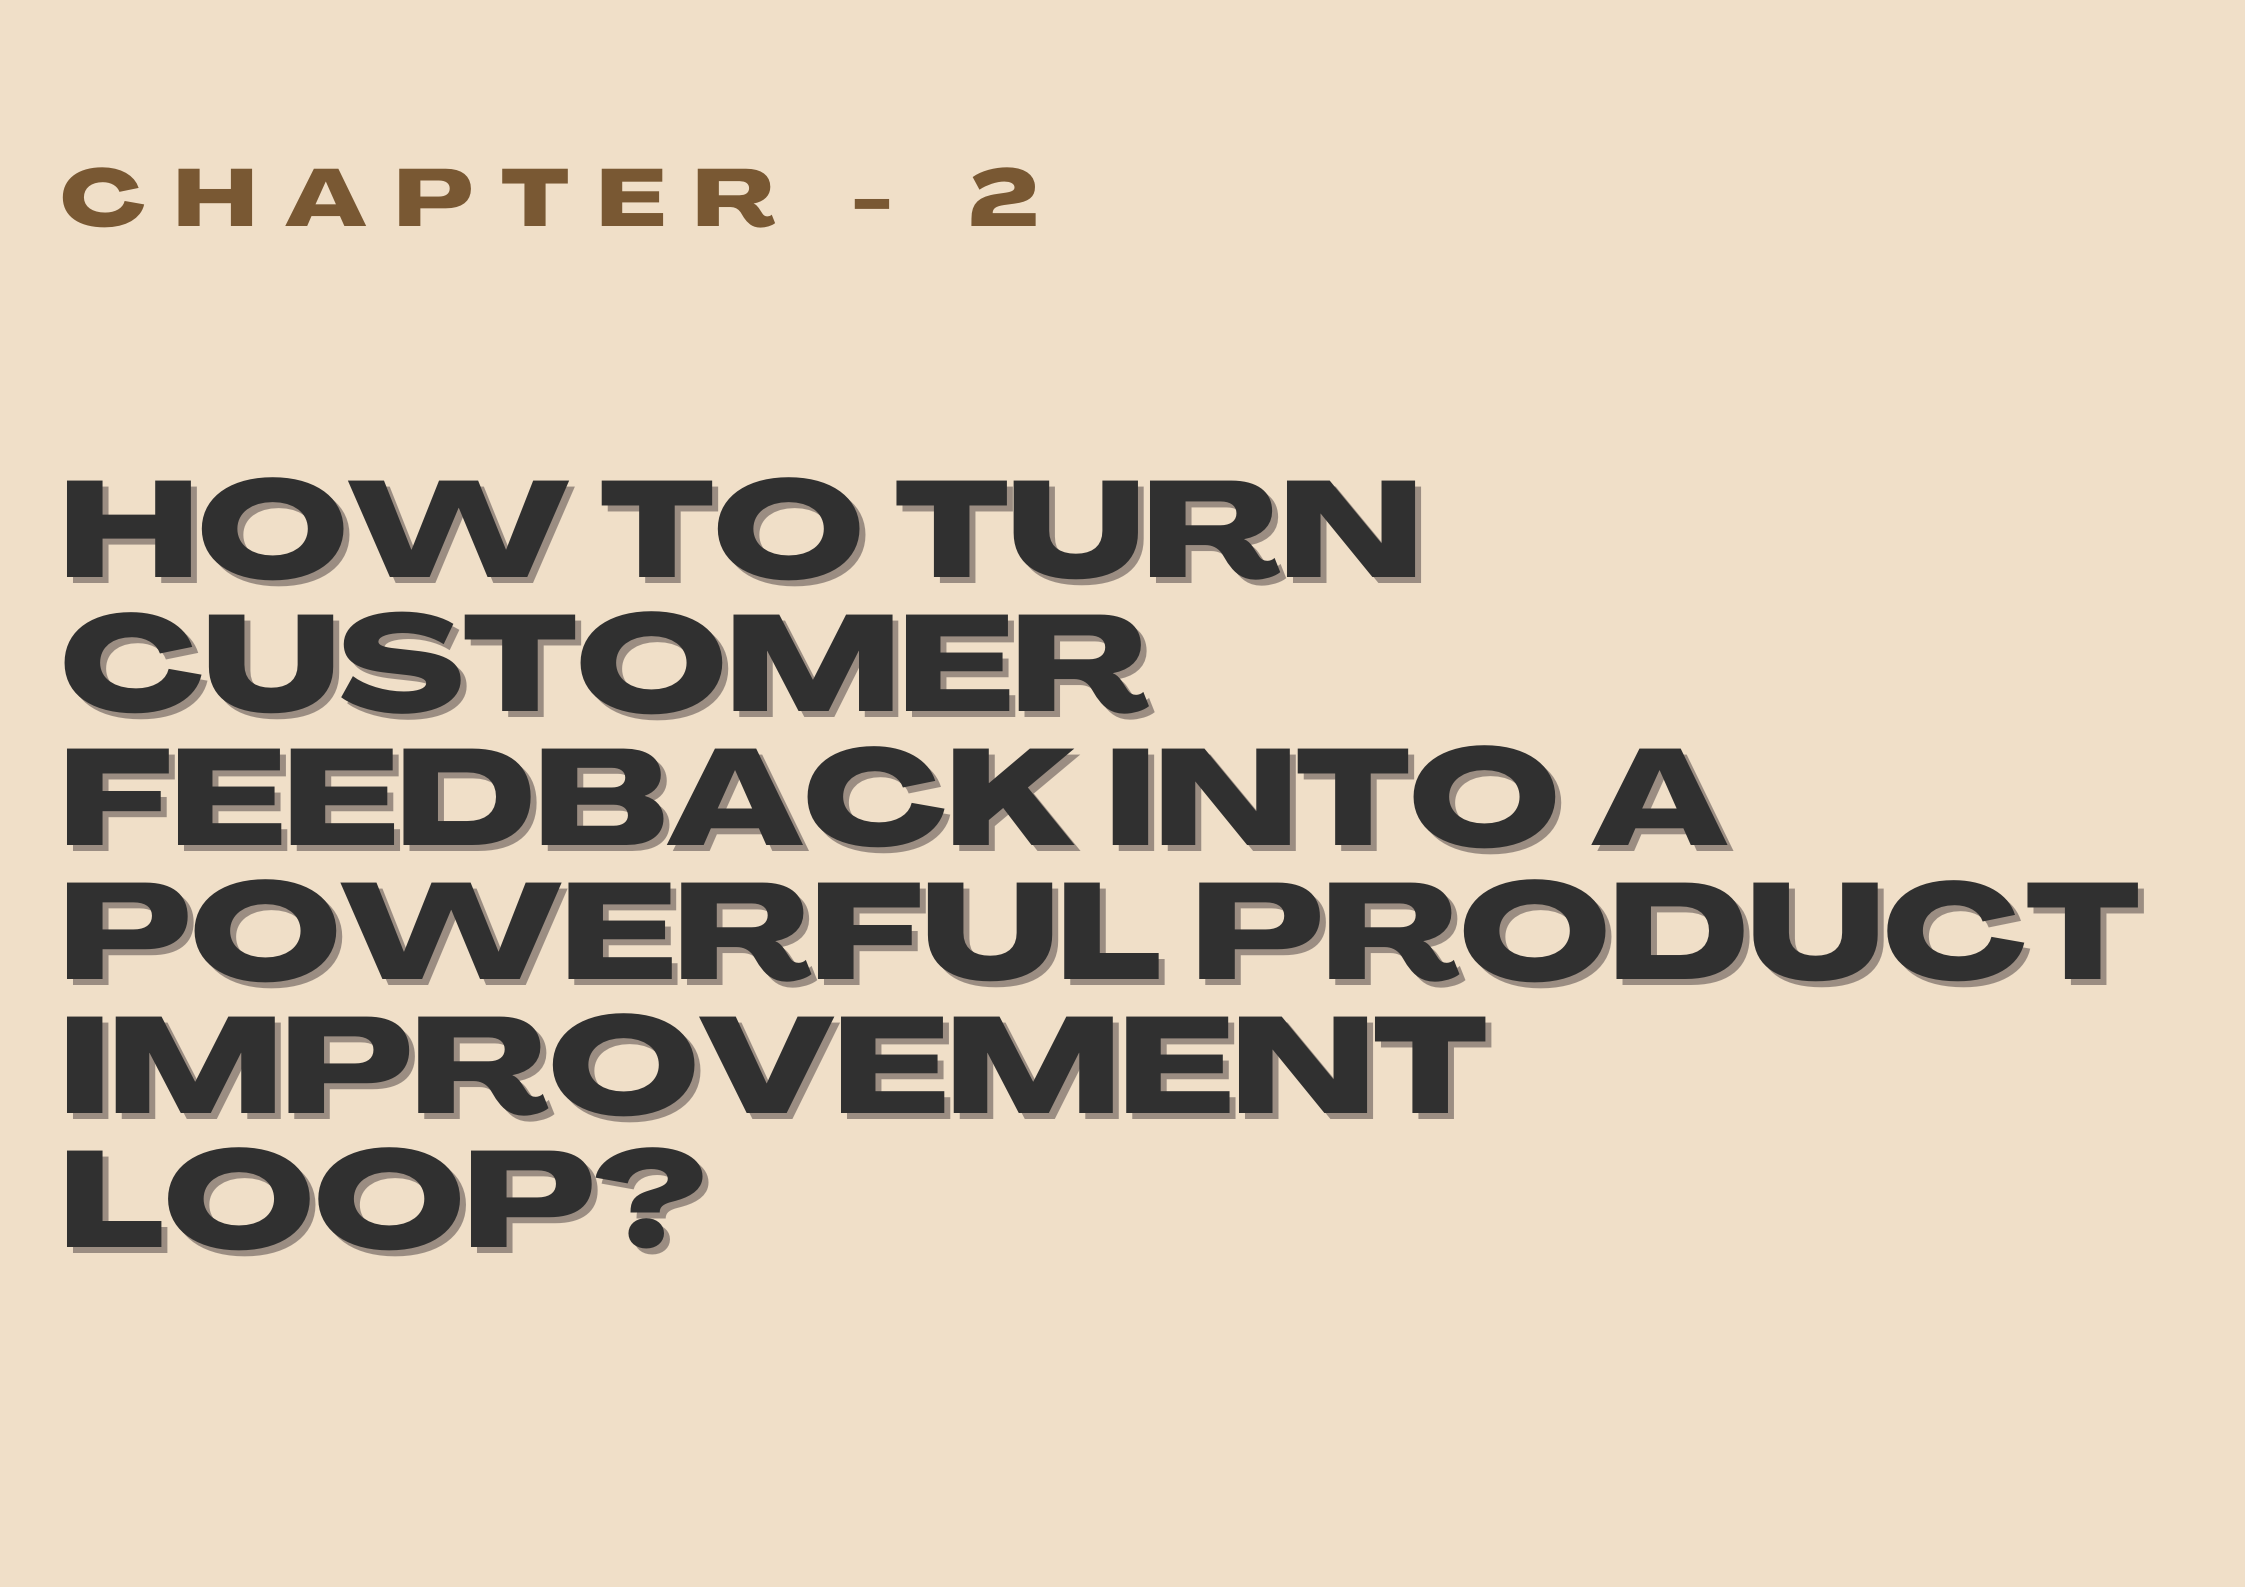 How to Turn Customer Feedback Into a Powerful Product Improvement Loop?